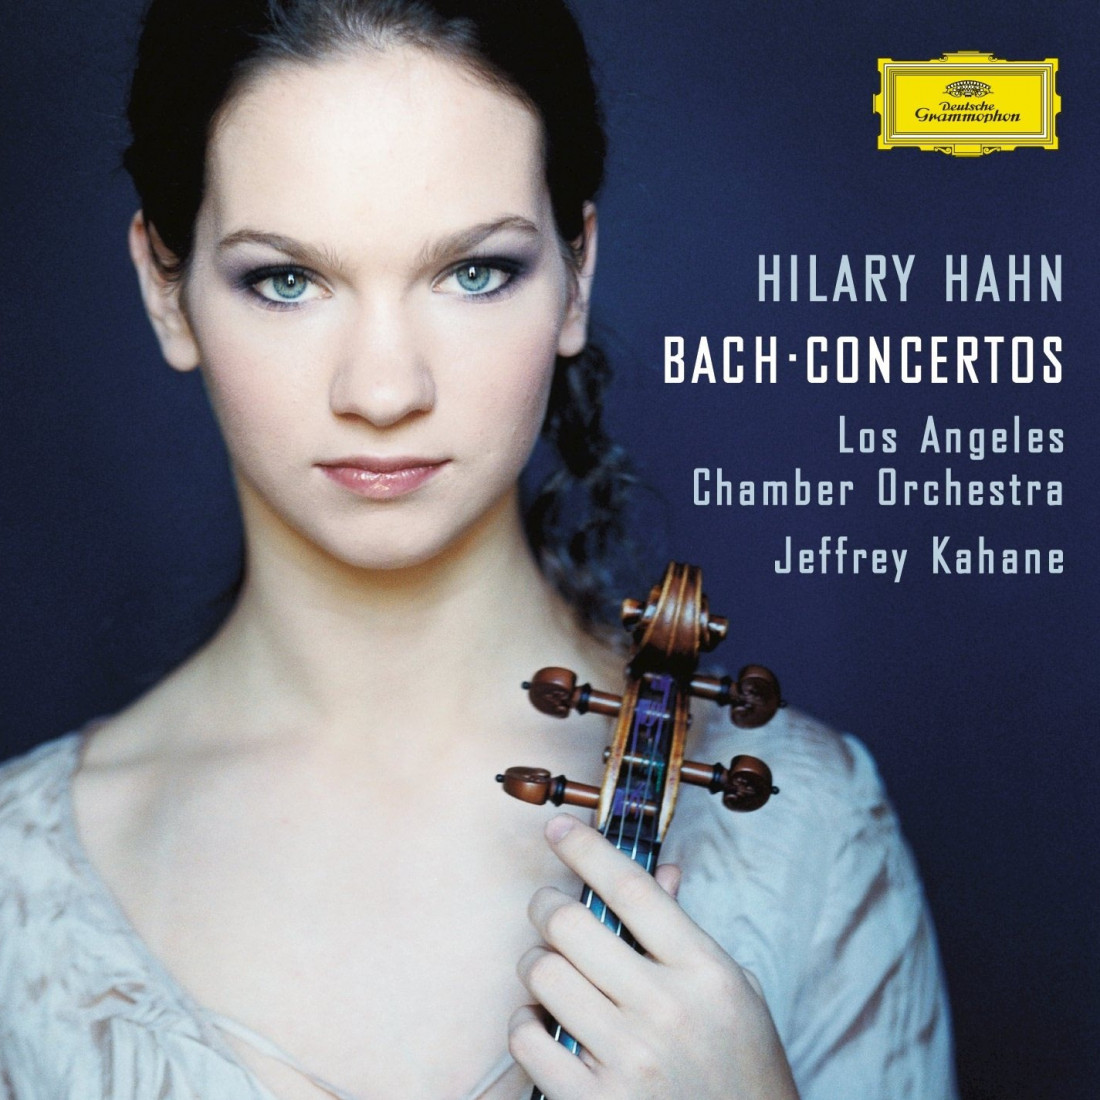 [Hilary Hahn] BWV 1060 3.Allegro-Bach Concerto for 2 Harpsichords,Strings,and Continuo… Photo-Image